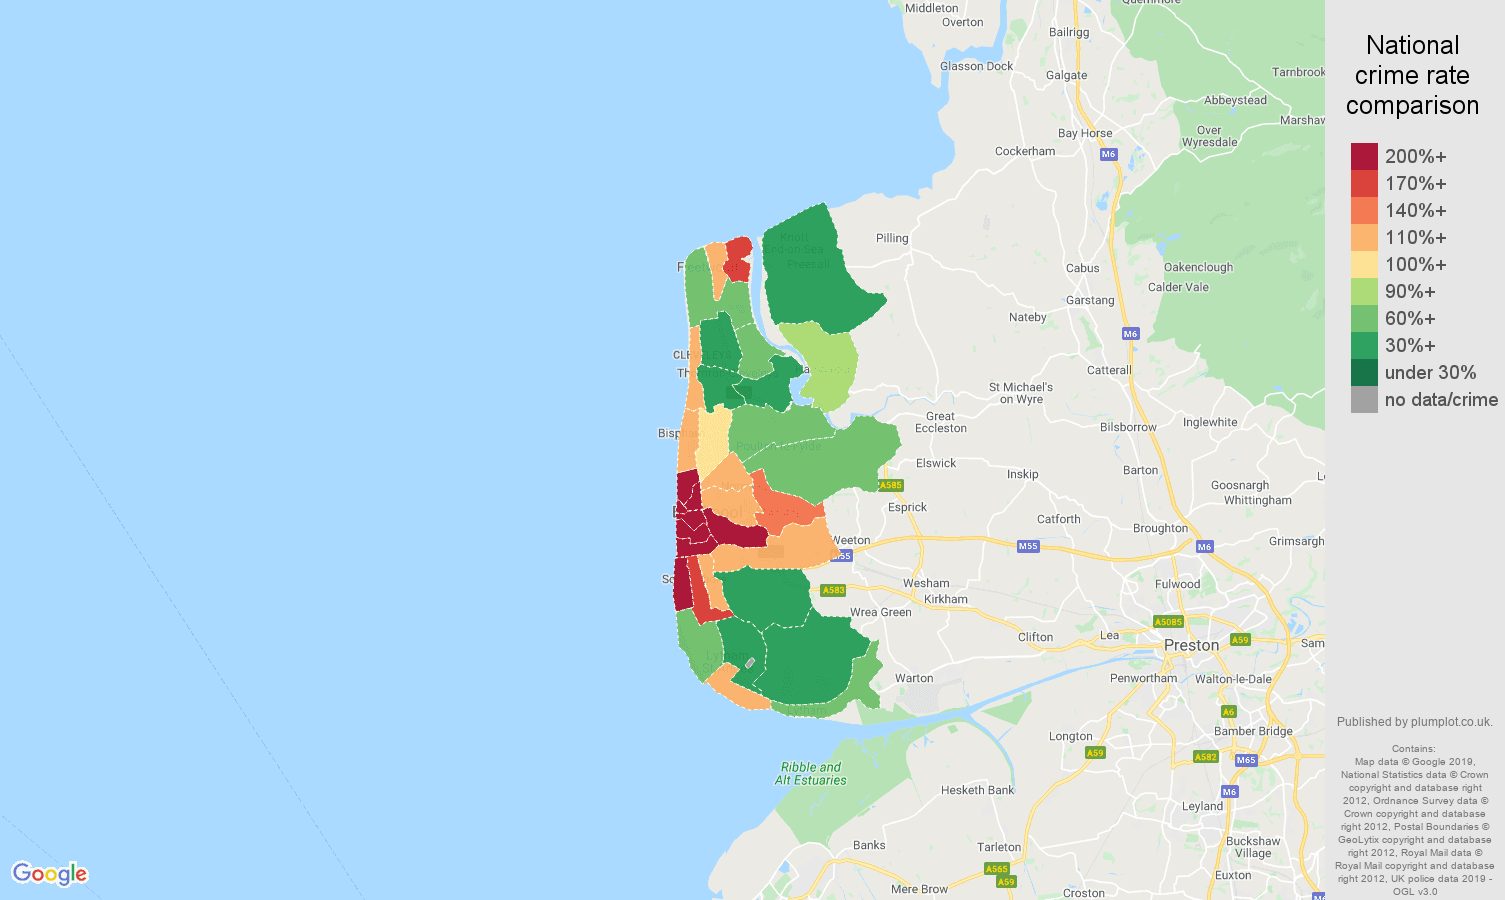 Blackpool other theft crime rate comparison map